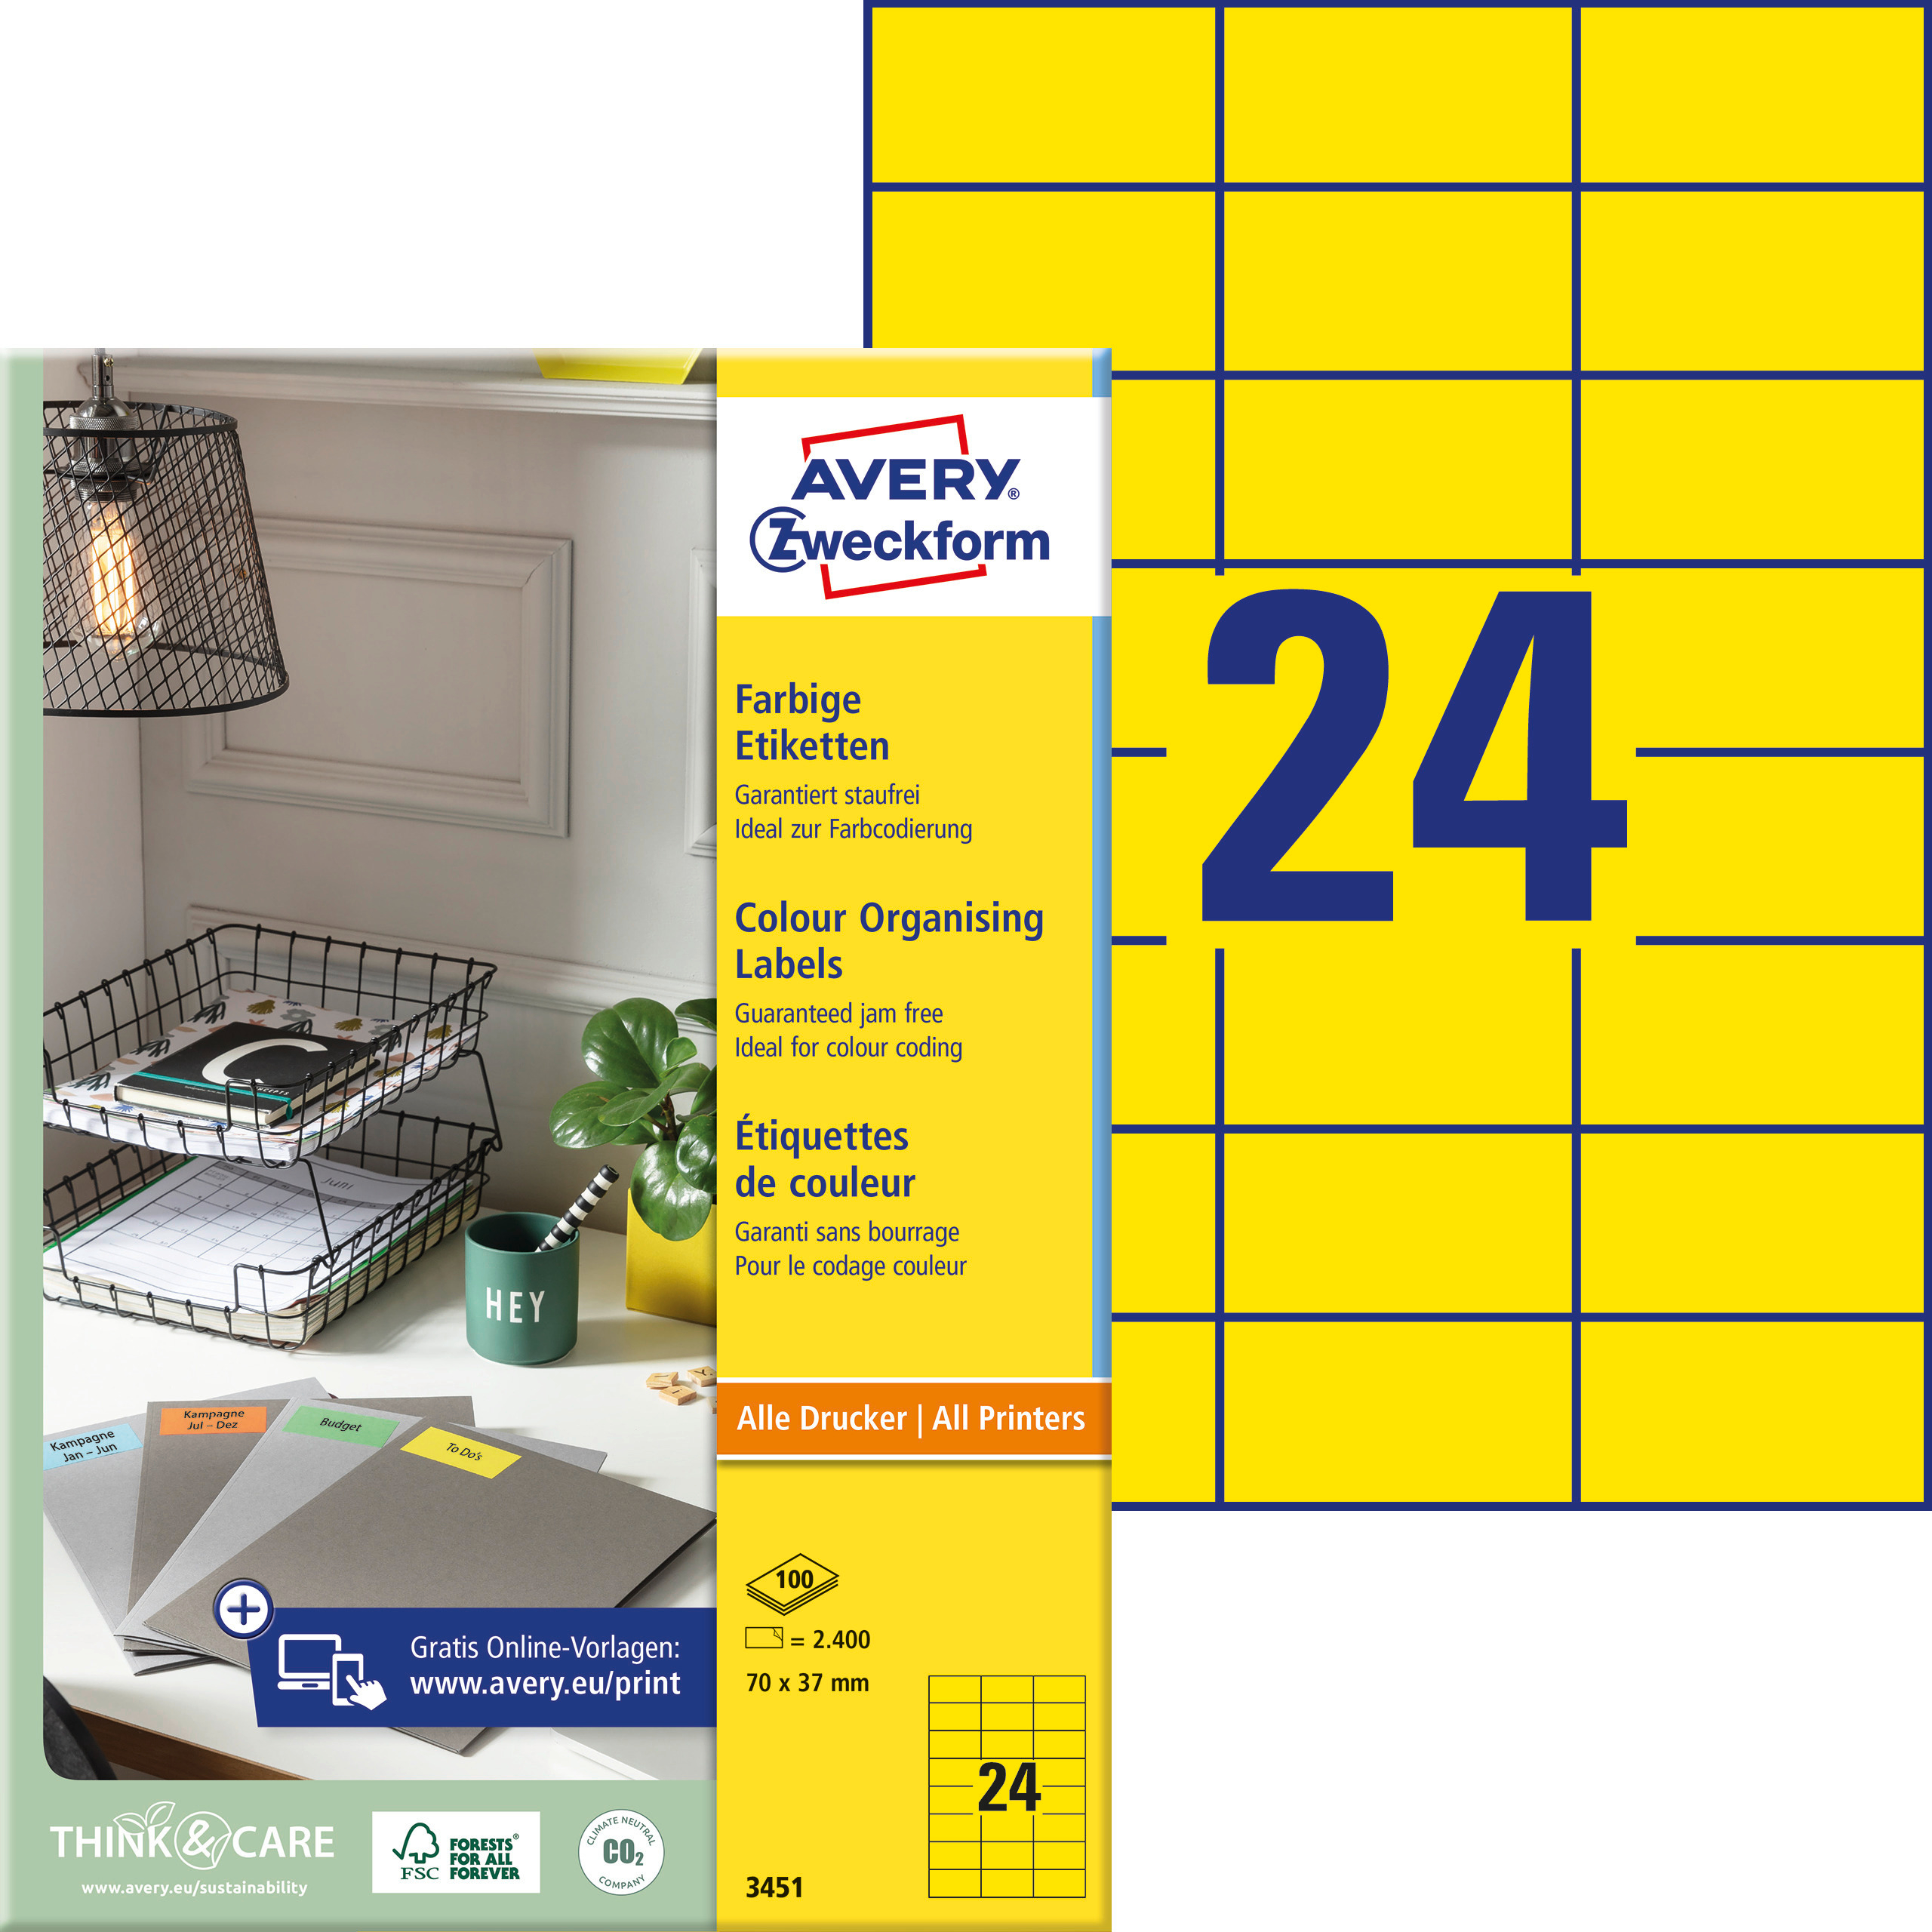 AVERY ZWECKFORM Etiquettes 70x37mm 3451 Universel, jaune 100fl./24pc. Universel, jaune 100fl./24pc.